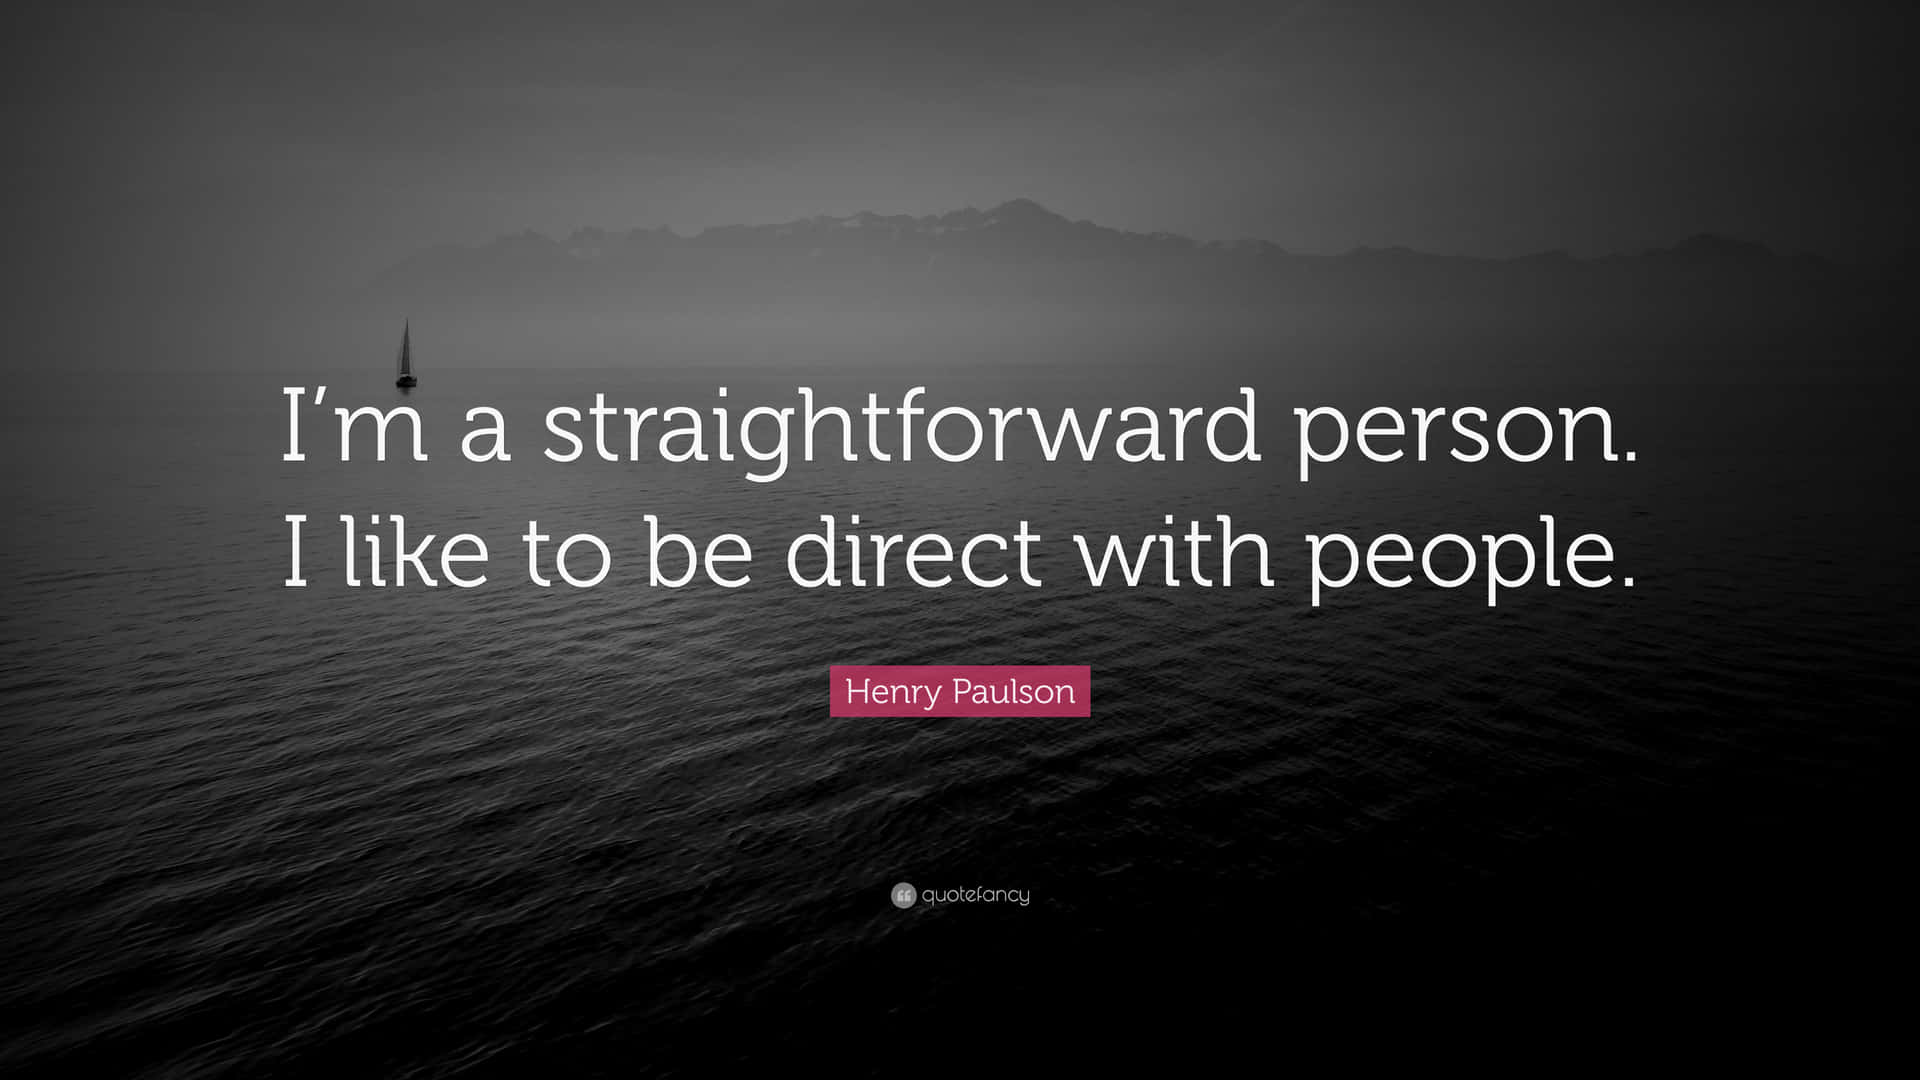 Henry Paulson On Personal Interaction Wallpaper